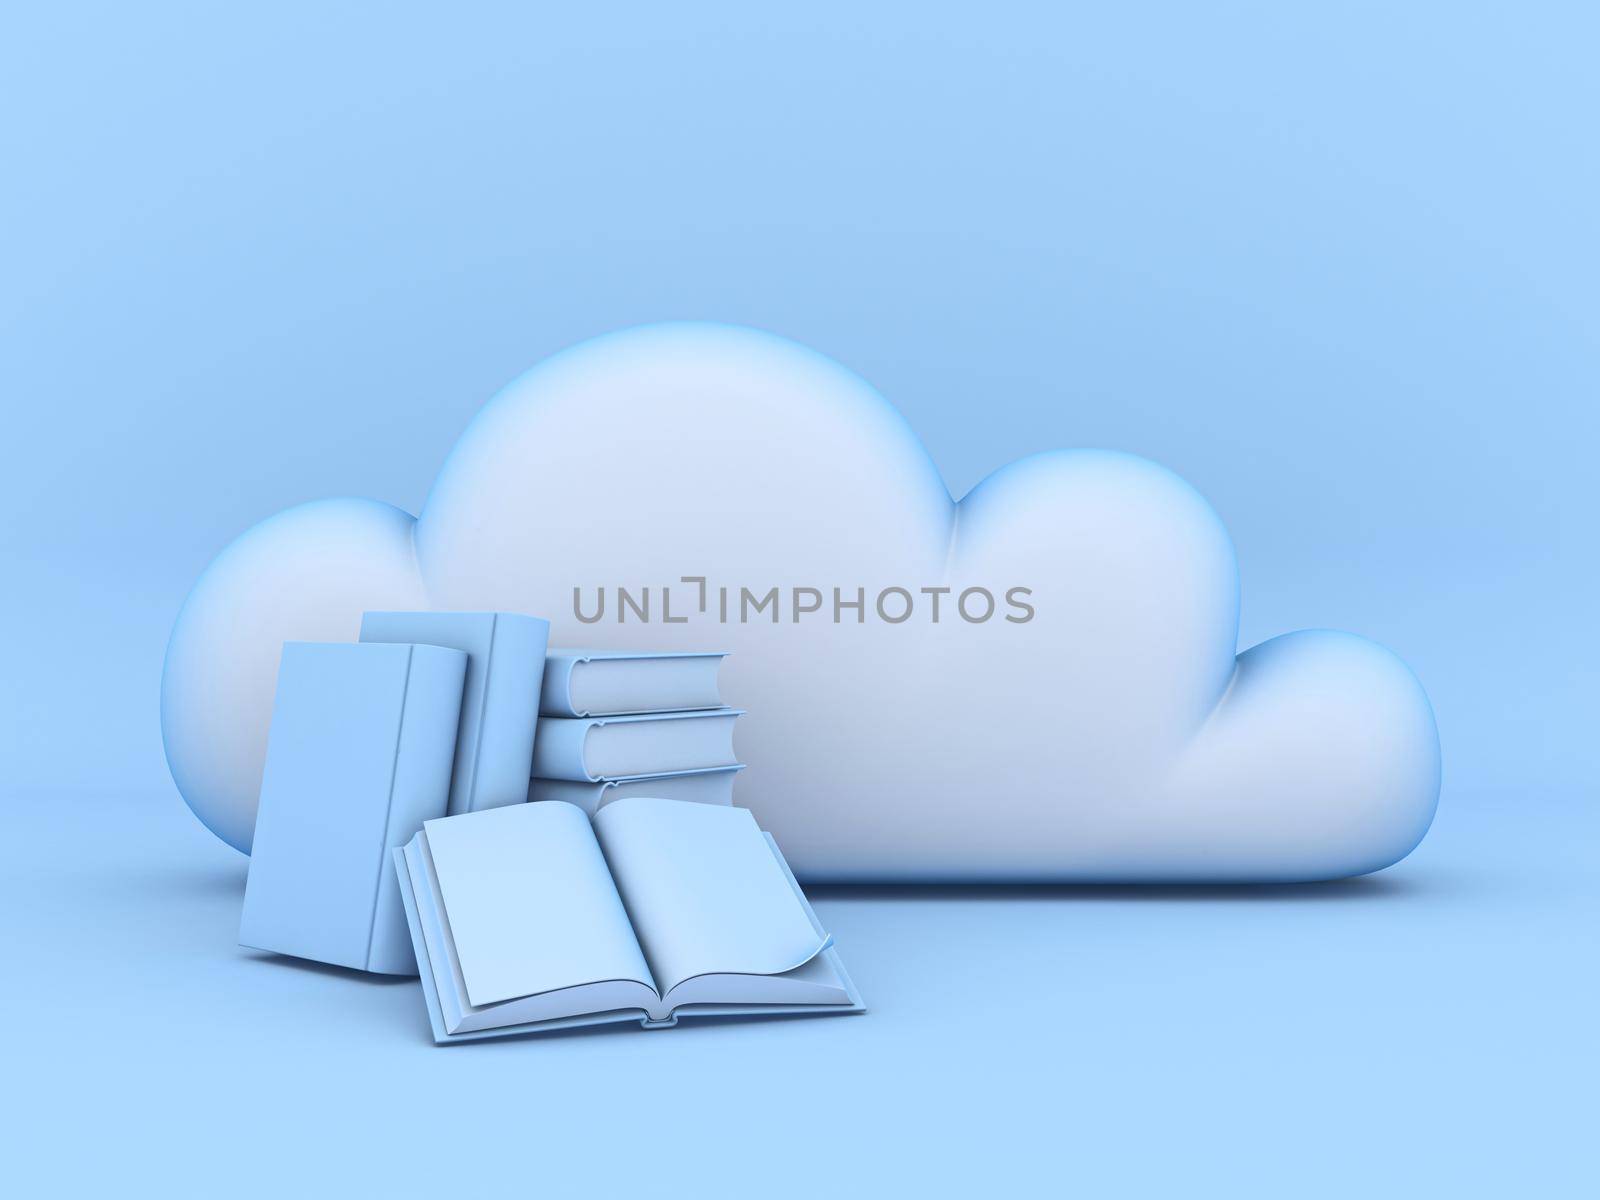 Cloud concept online books 3D rendering illustration isolated on blue background